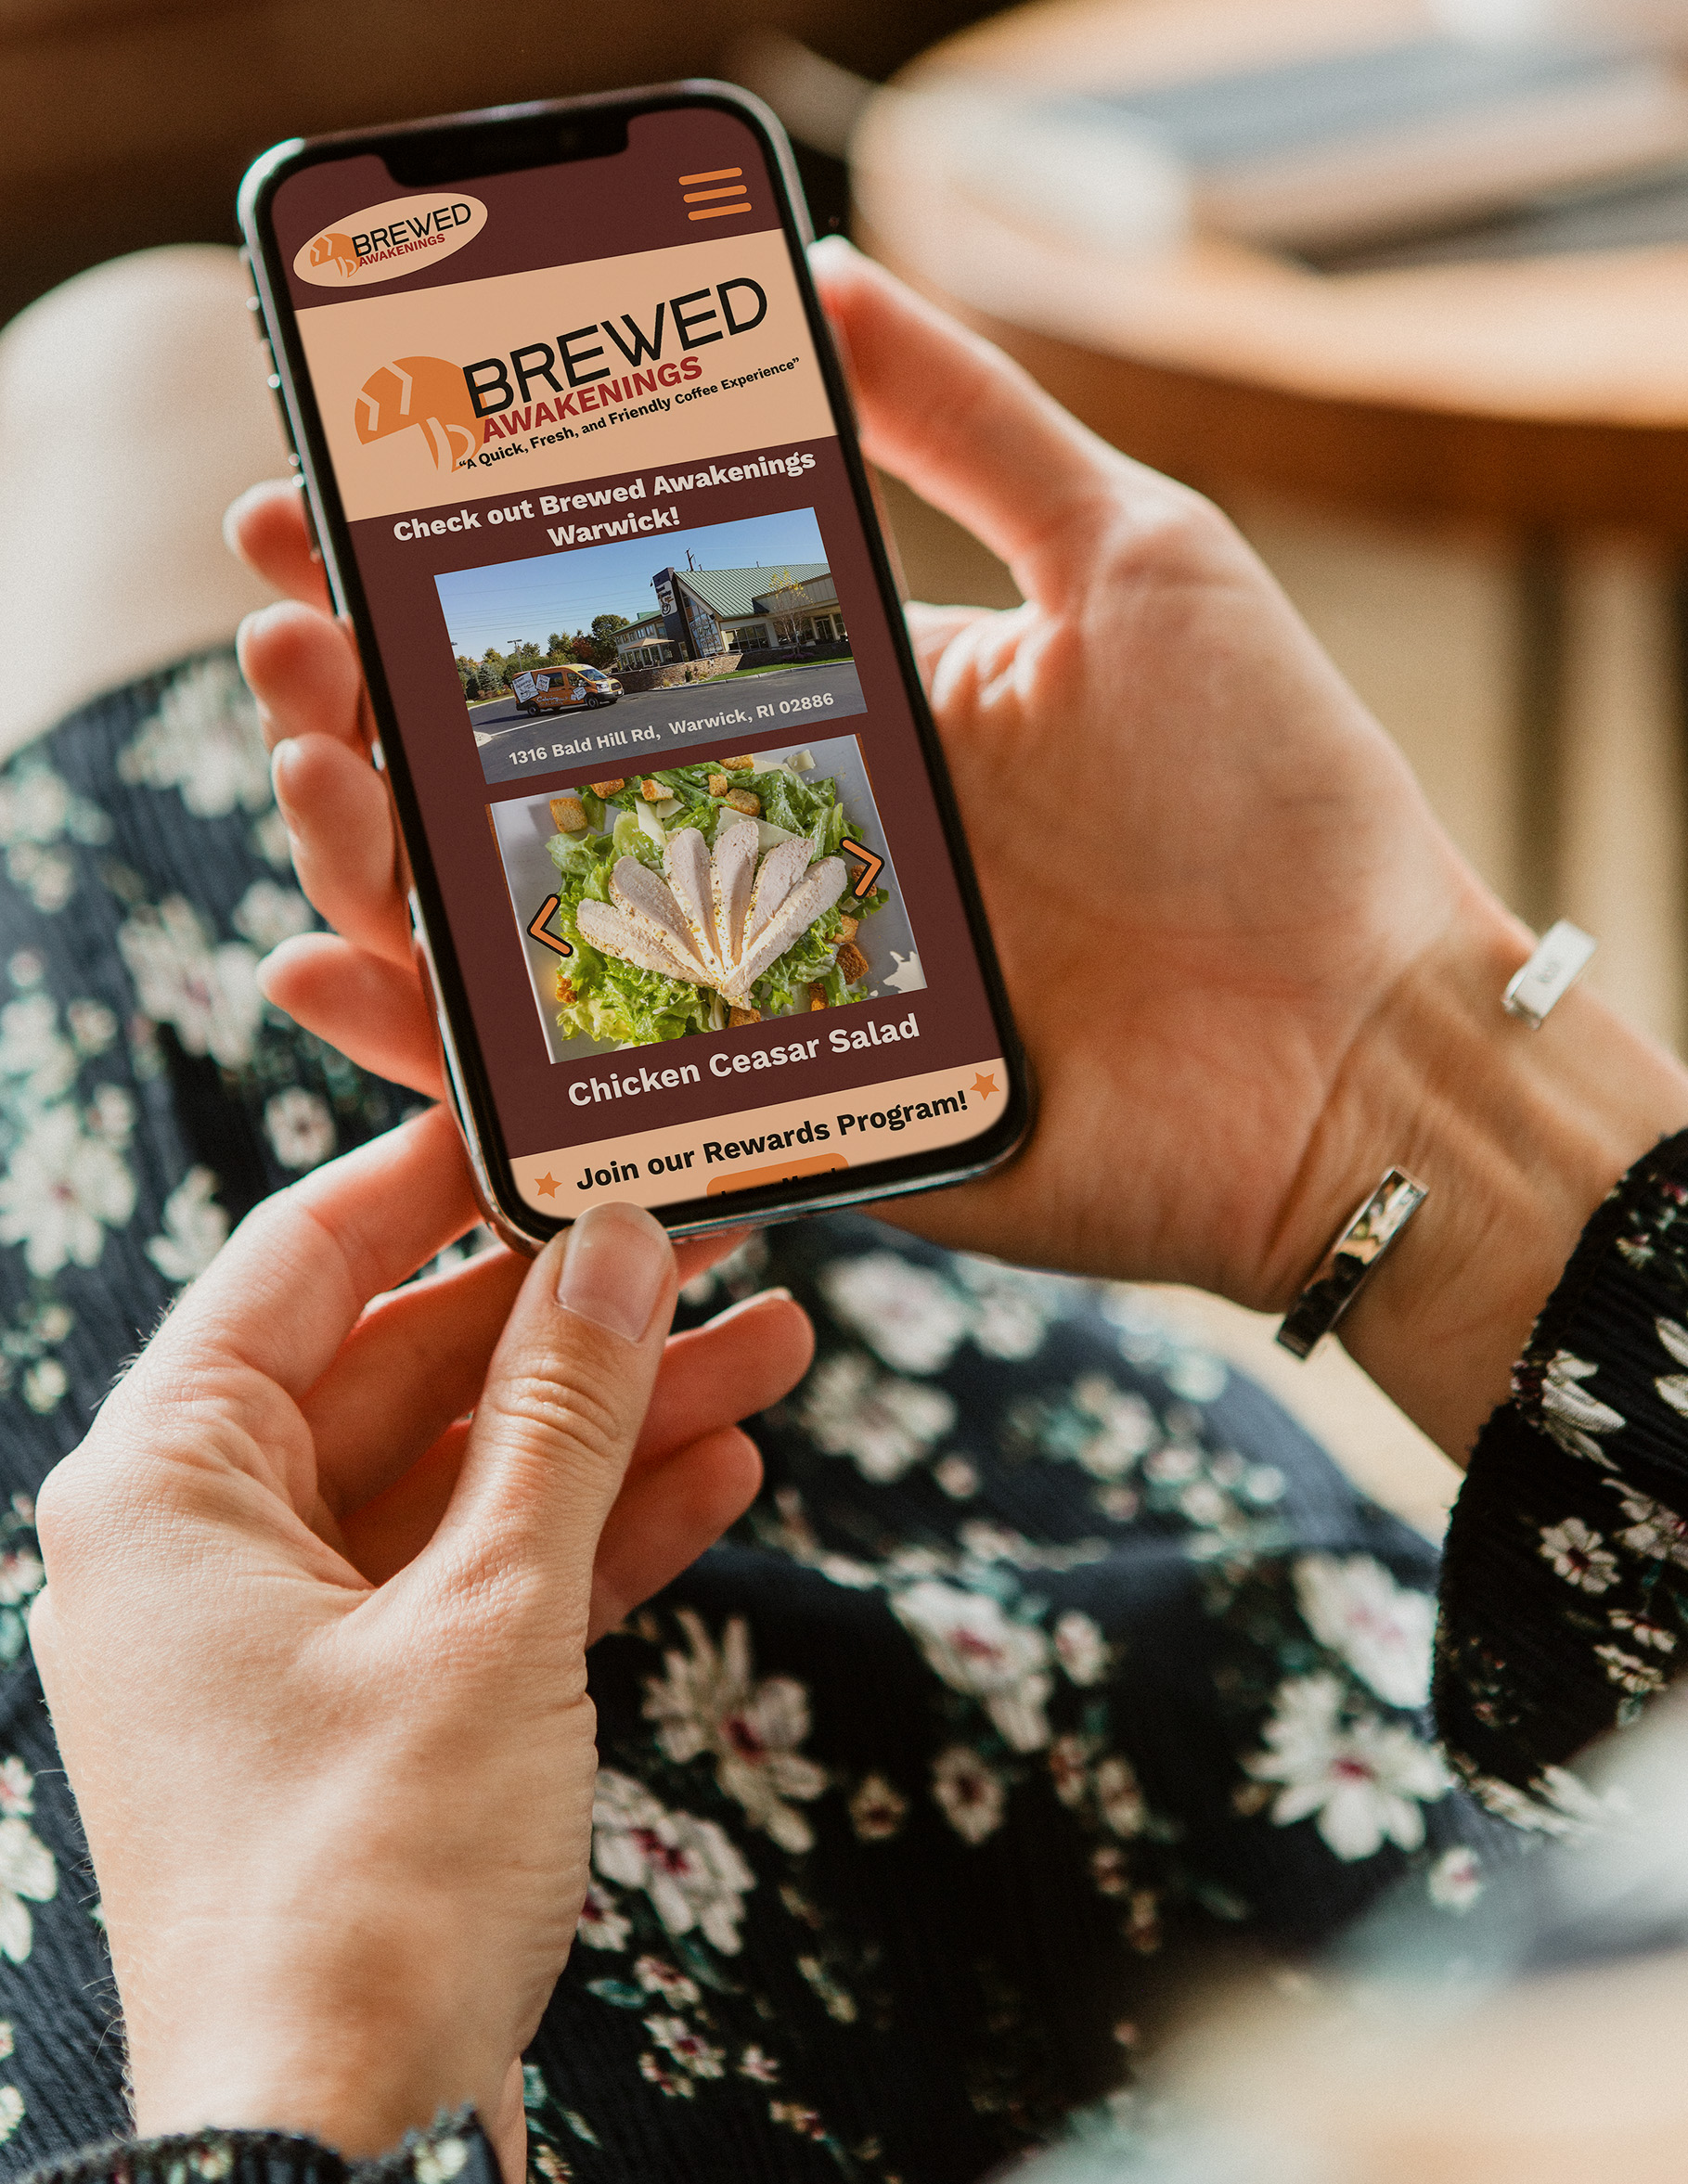 A mockup of a Brewed Awakenings cellphone app on a smartphone.